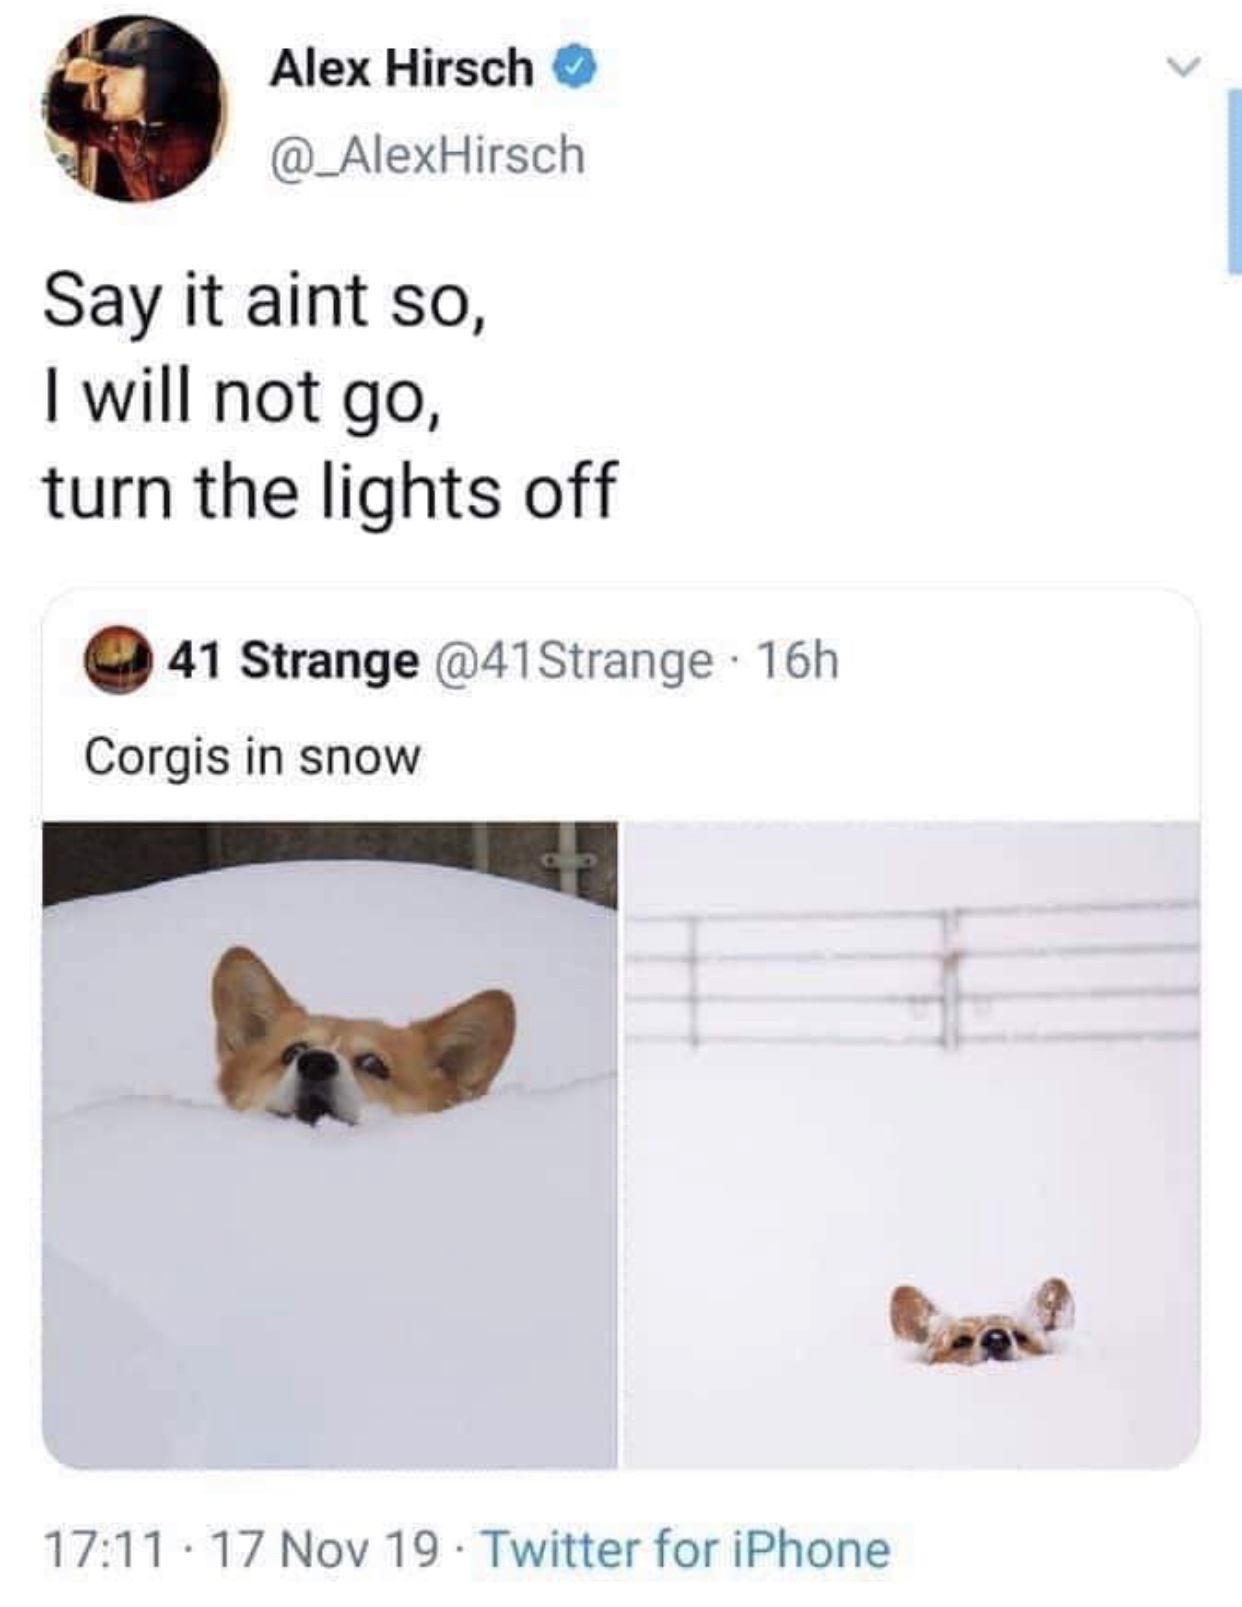 say it ain t so i will not go turn the lights off corgis in snow - Alex Hirsch Hirsch Say it aint so, I will not go, turn the lights off 41 Strange 16h Corgis in snow . 17 Nov 19 Twitter for iPhone